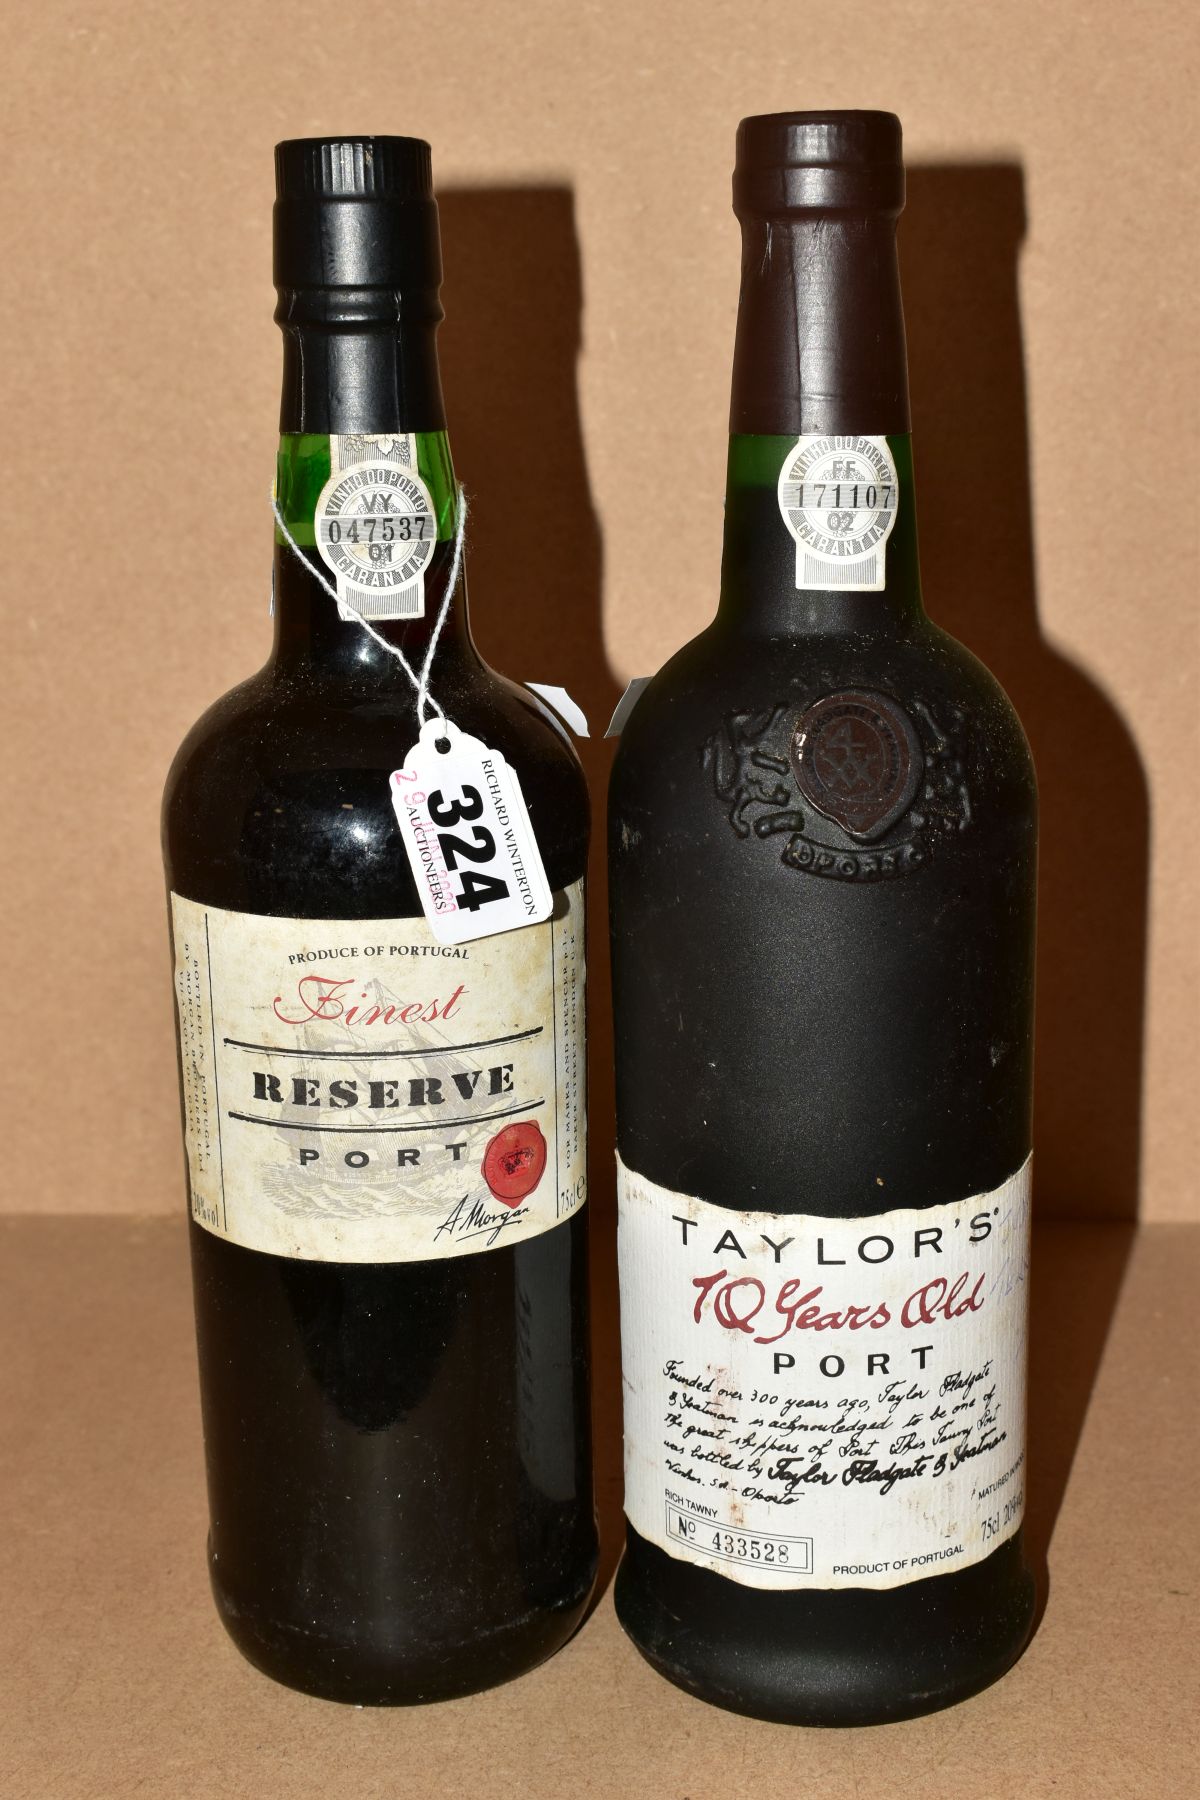 TWO BOTTLES OF PORT, comprising a bottle of Taylor's 10 year old, bottle No.433528, 20% vol, 75cl